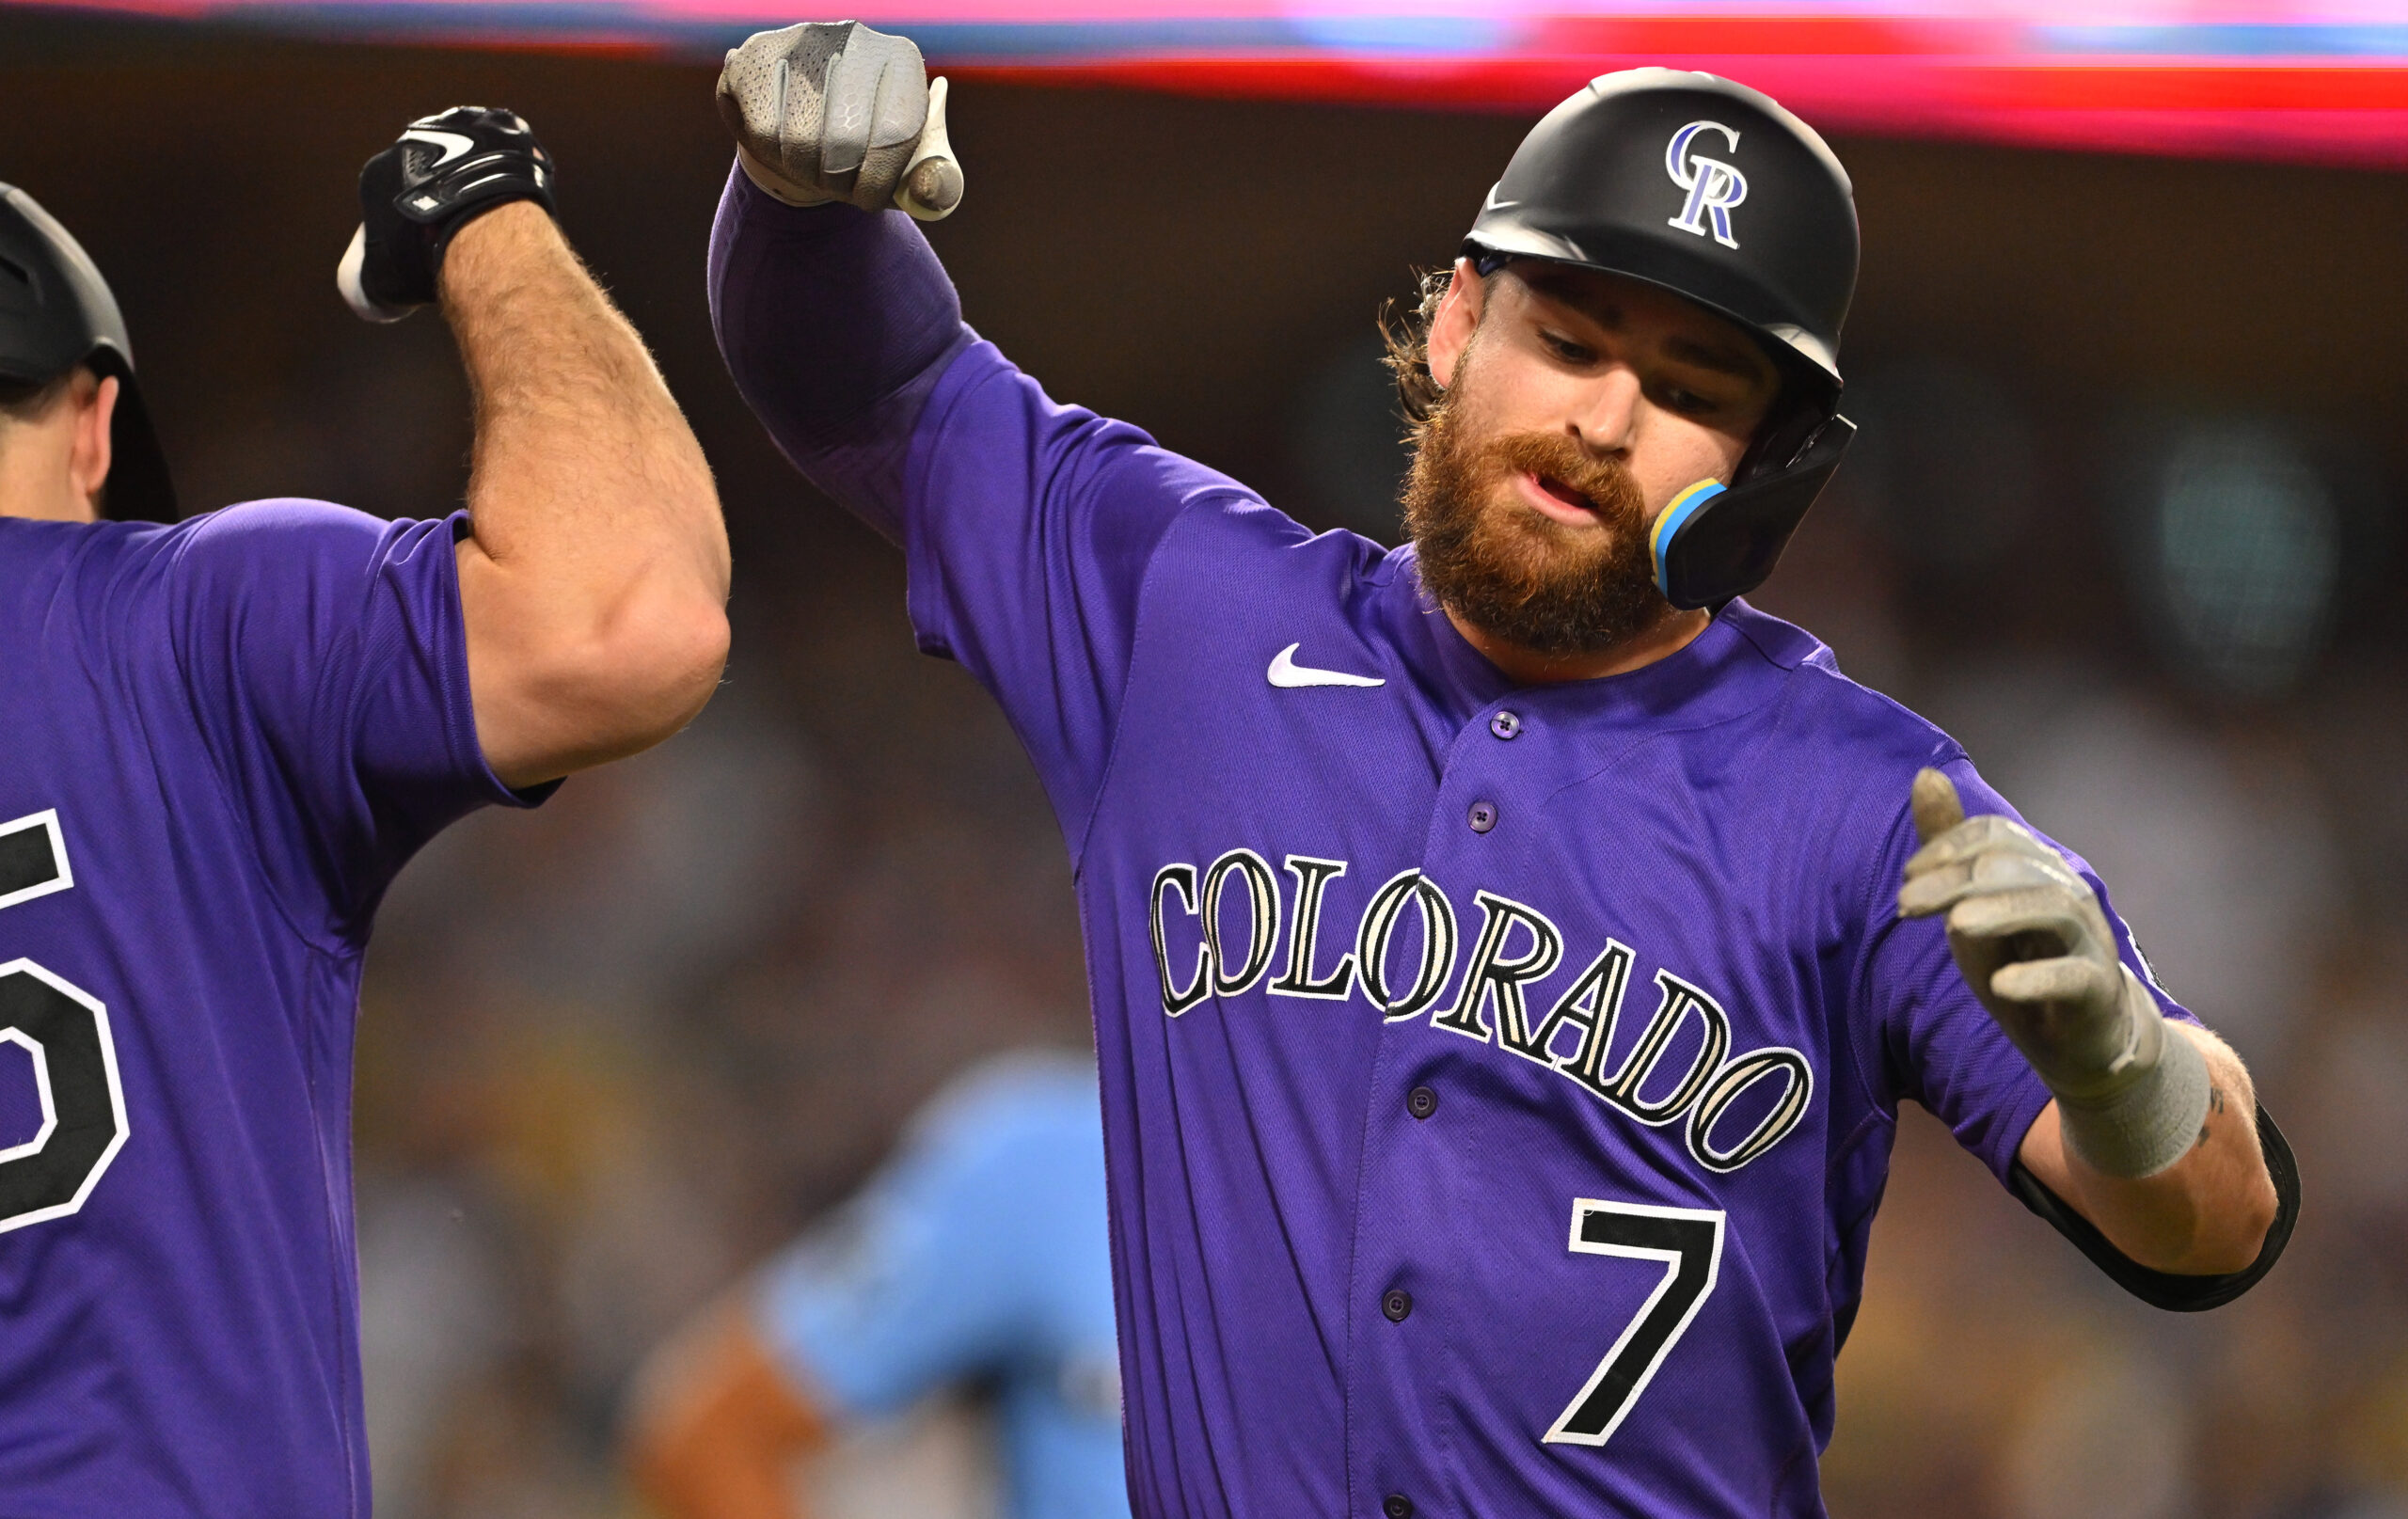 Rockies pitchers, players and coaches: Who should go?